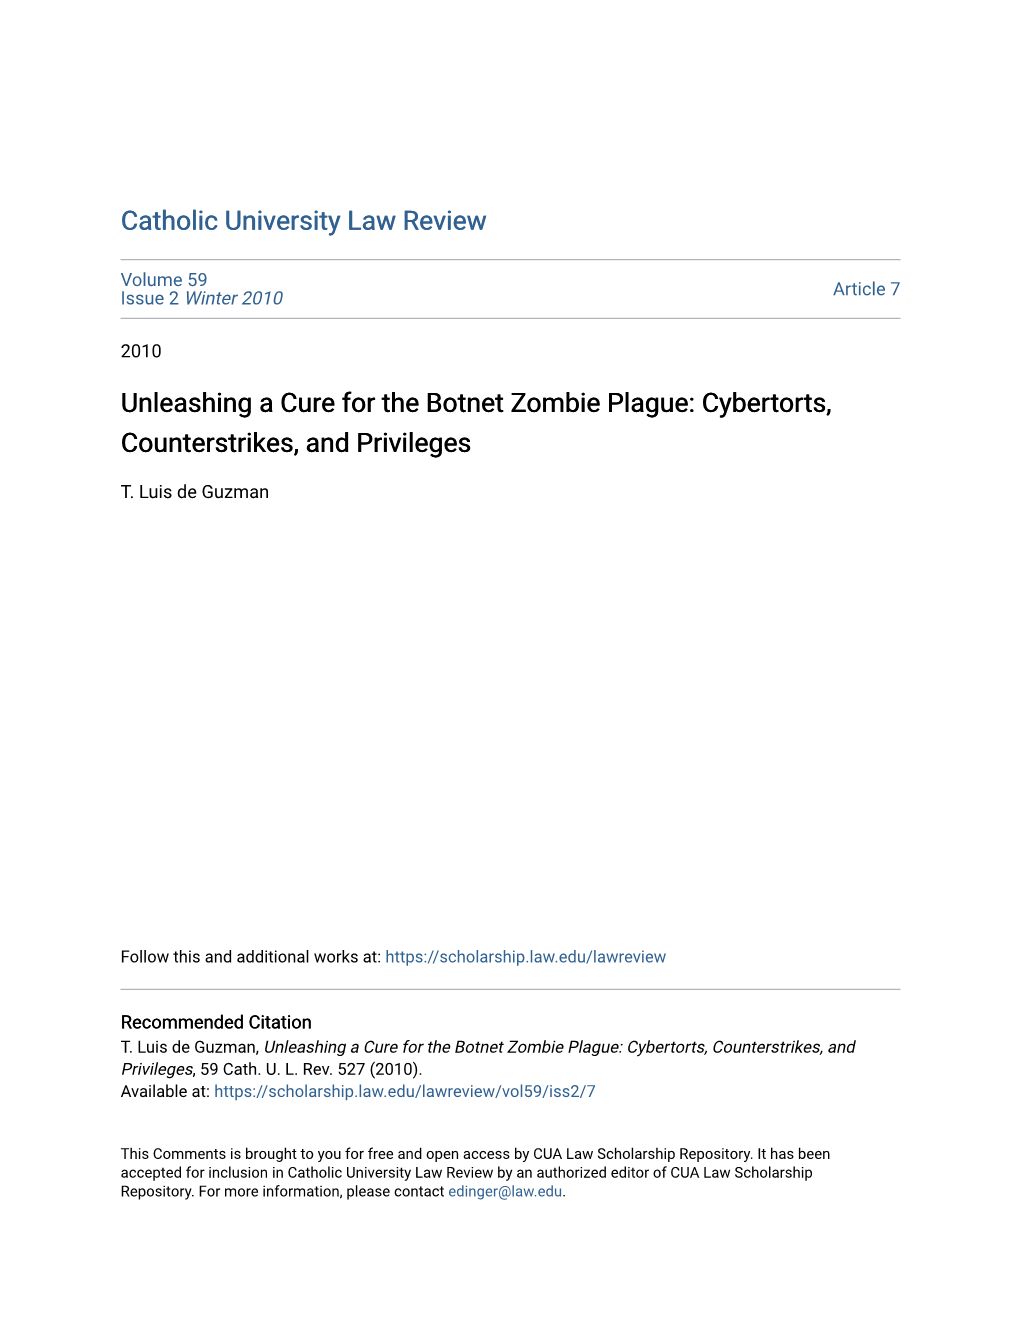 Unleashing a Cure for the Botnet Zombie Plague: Cybertorts, Counterstrikes, and Privileges